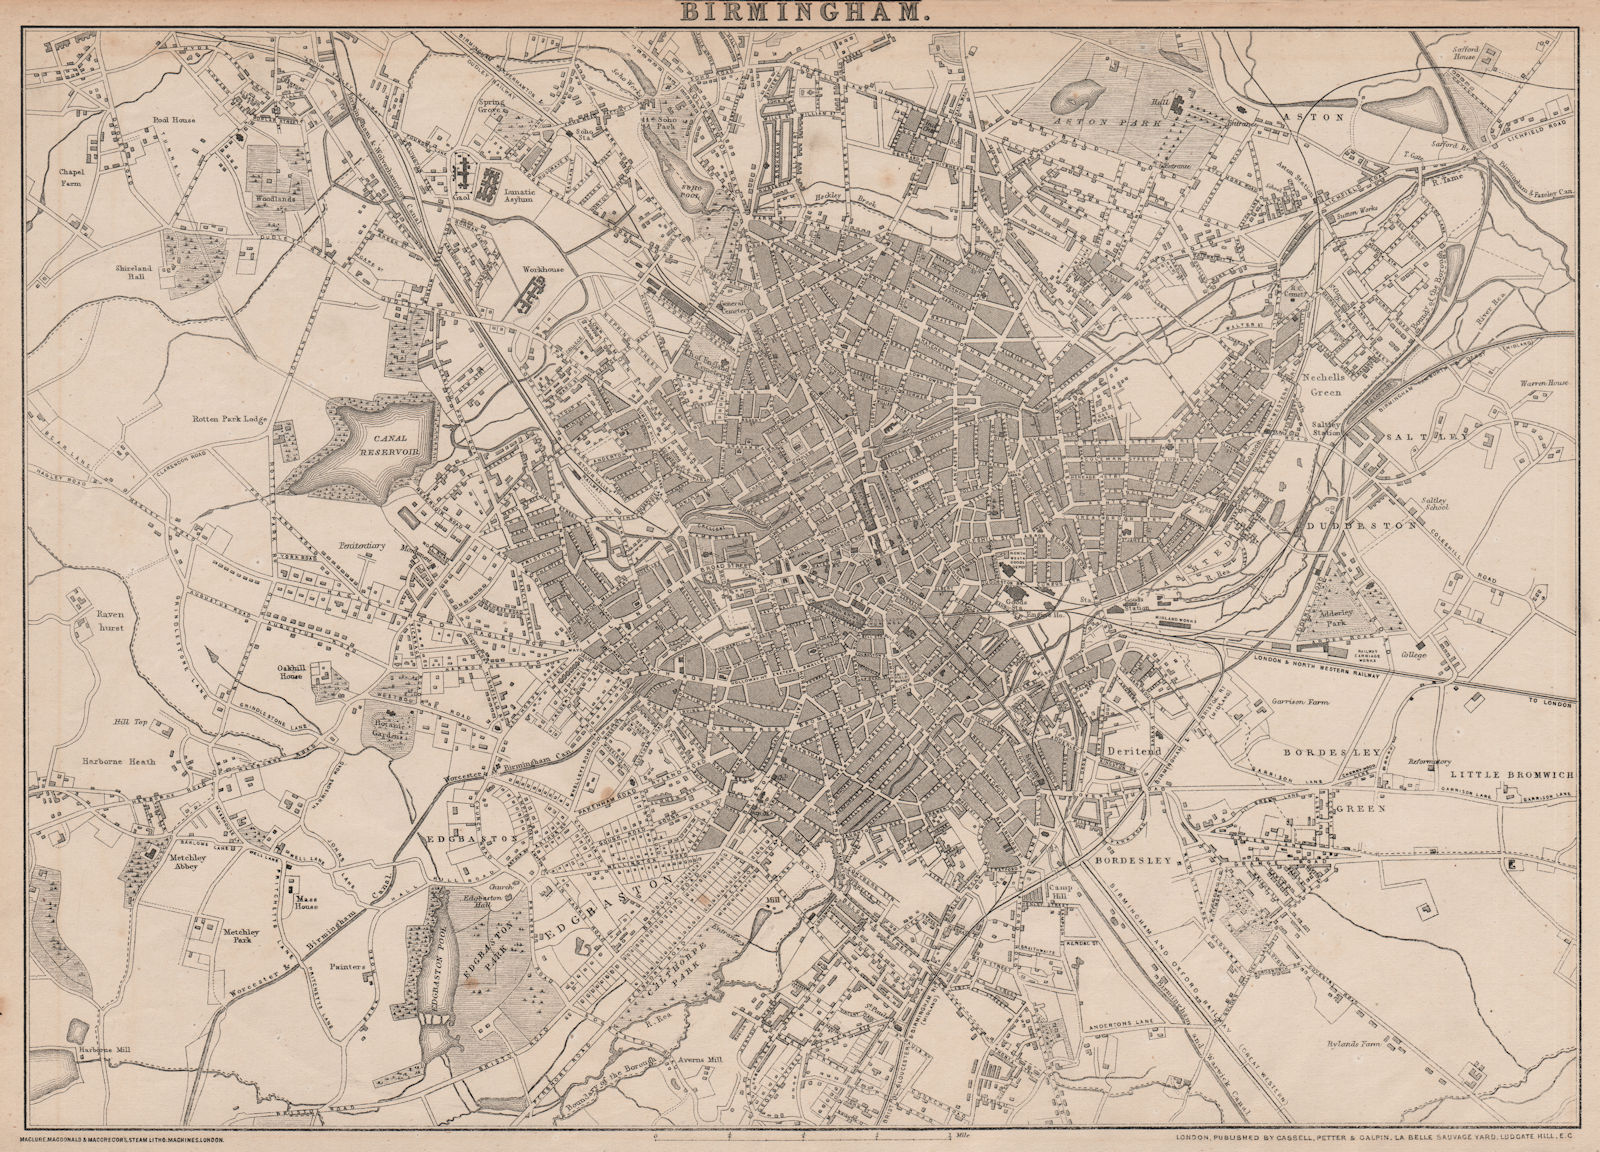 Associate Product BIRMINGHAM. Large town/city plan by JW LOWRY for the Dispatch Atlas 1862 map